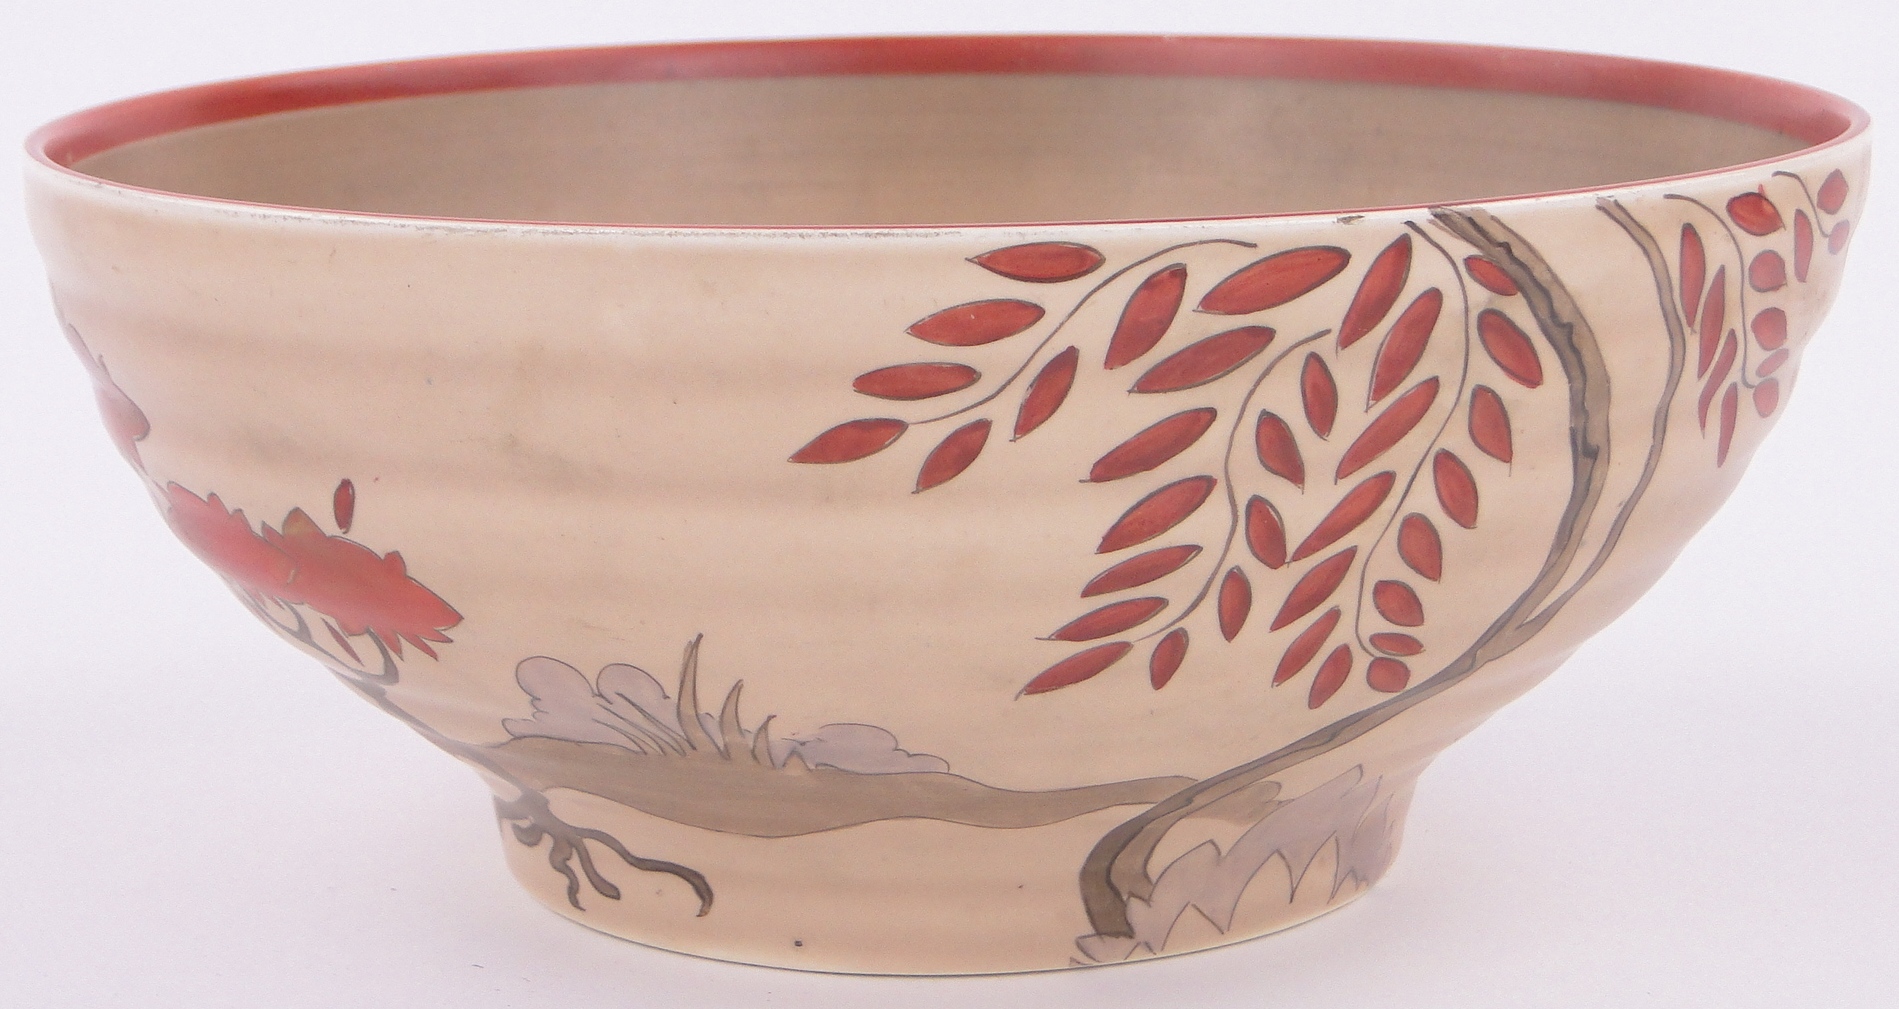 A Clarice Cliff fruit bowl with painted stylised red trees on brown ground, 9.5" diameter.